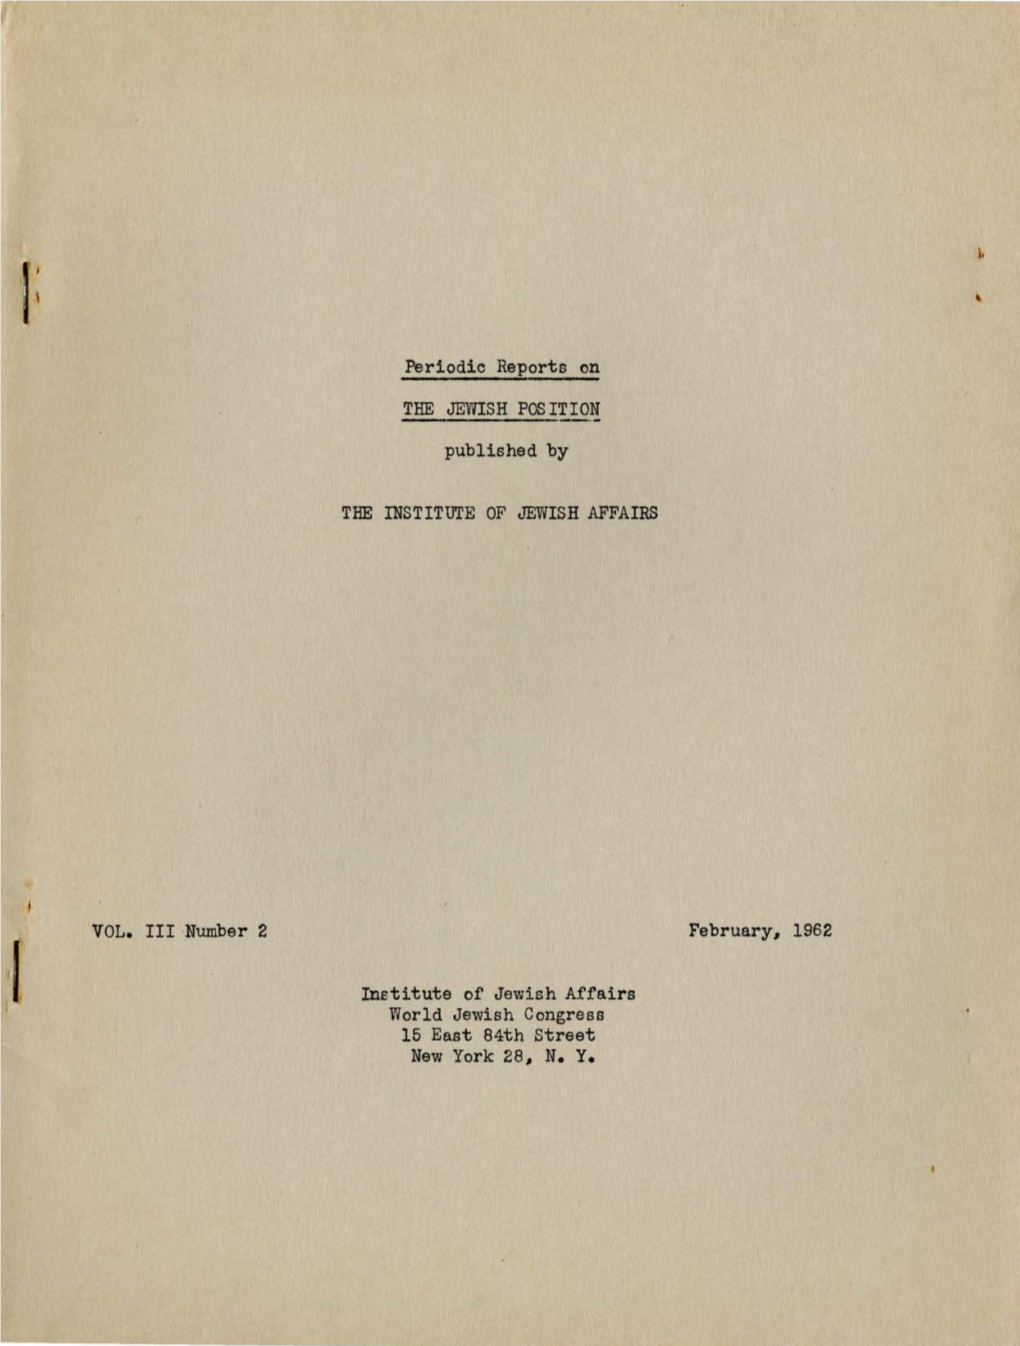 VOL. III Number 2 Periodic Reports on the JEWISH POSIT ION Published by the INSTITUTE OF